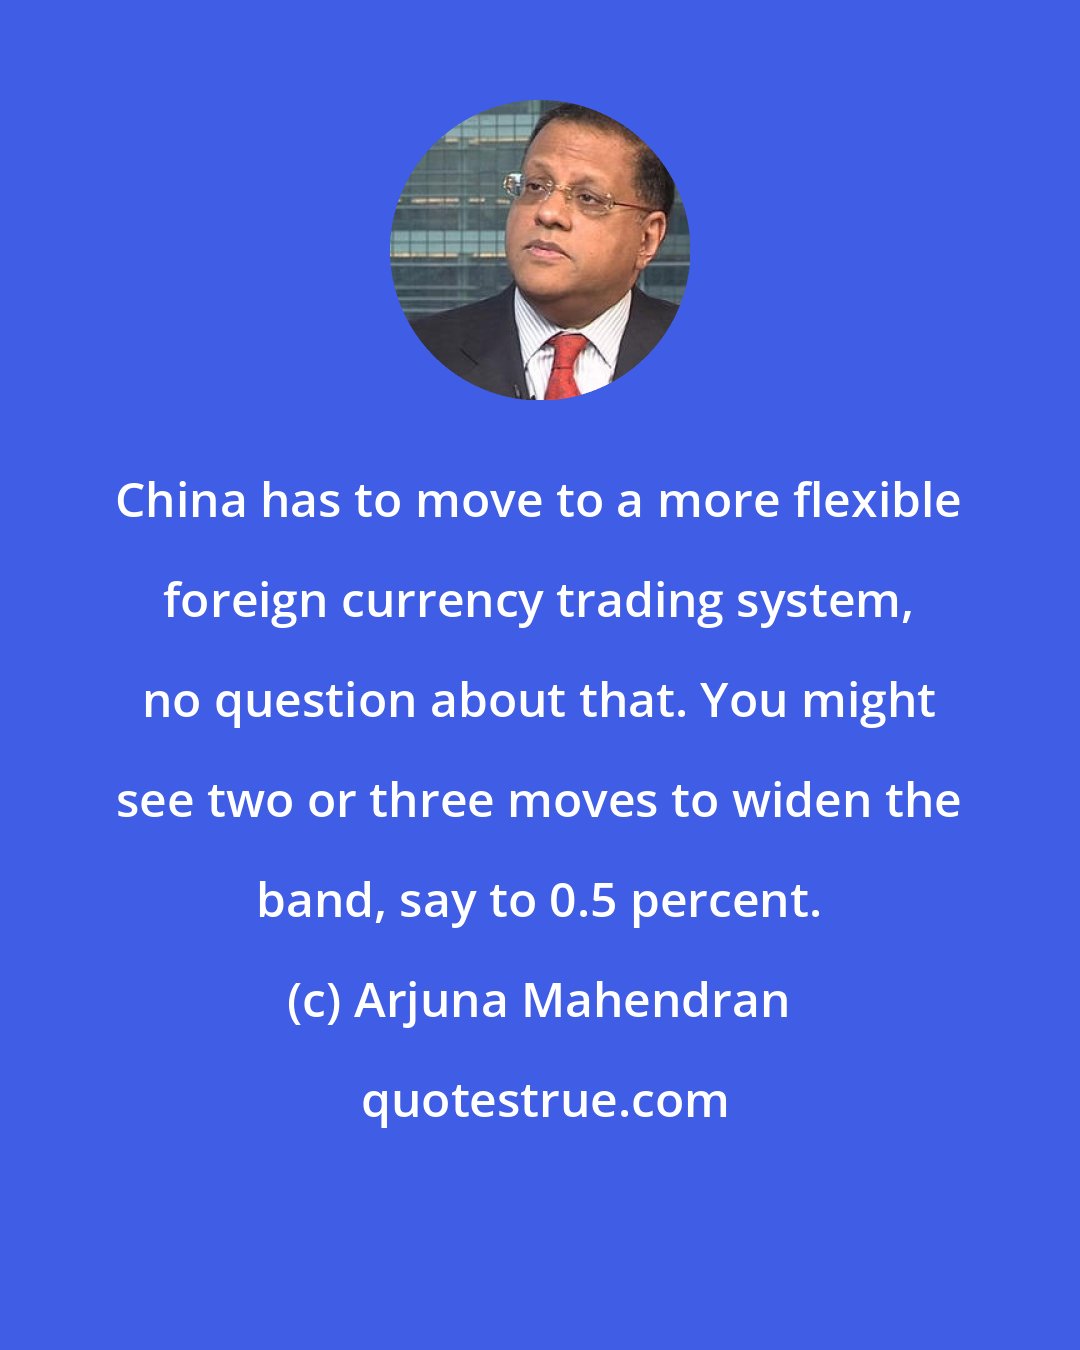 Arjuna Mahendran: China has to move to a more flexible foreign currency trading system, no question about that. You might see two or three moves to widen the band, say to 0.5 percent.